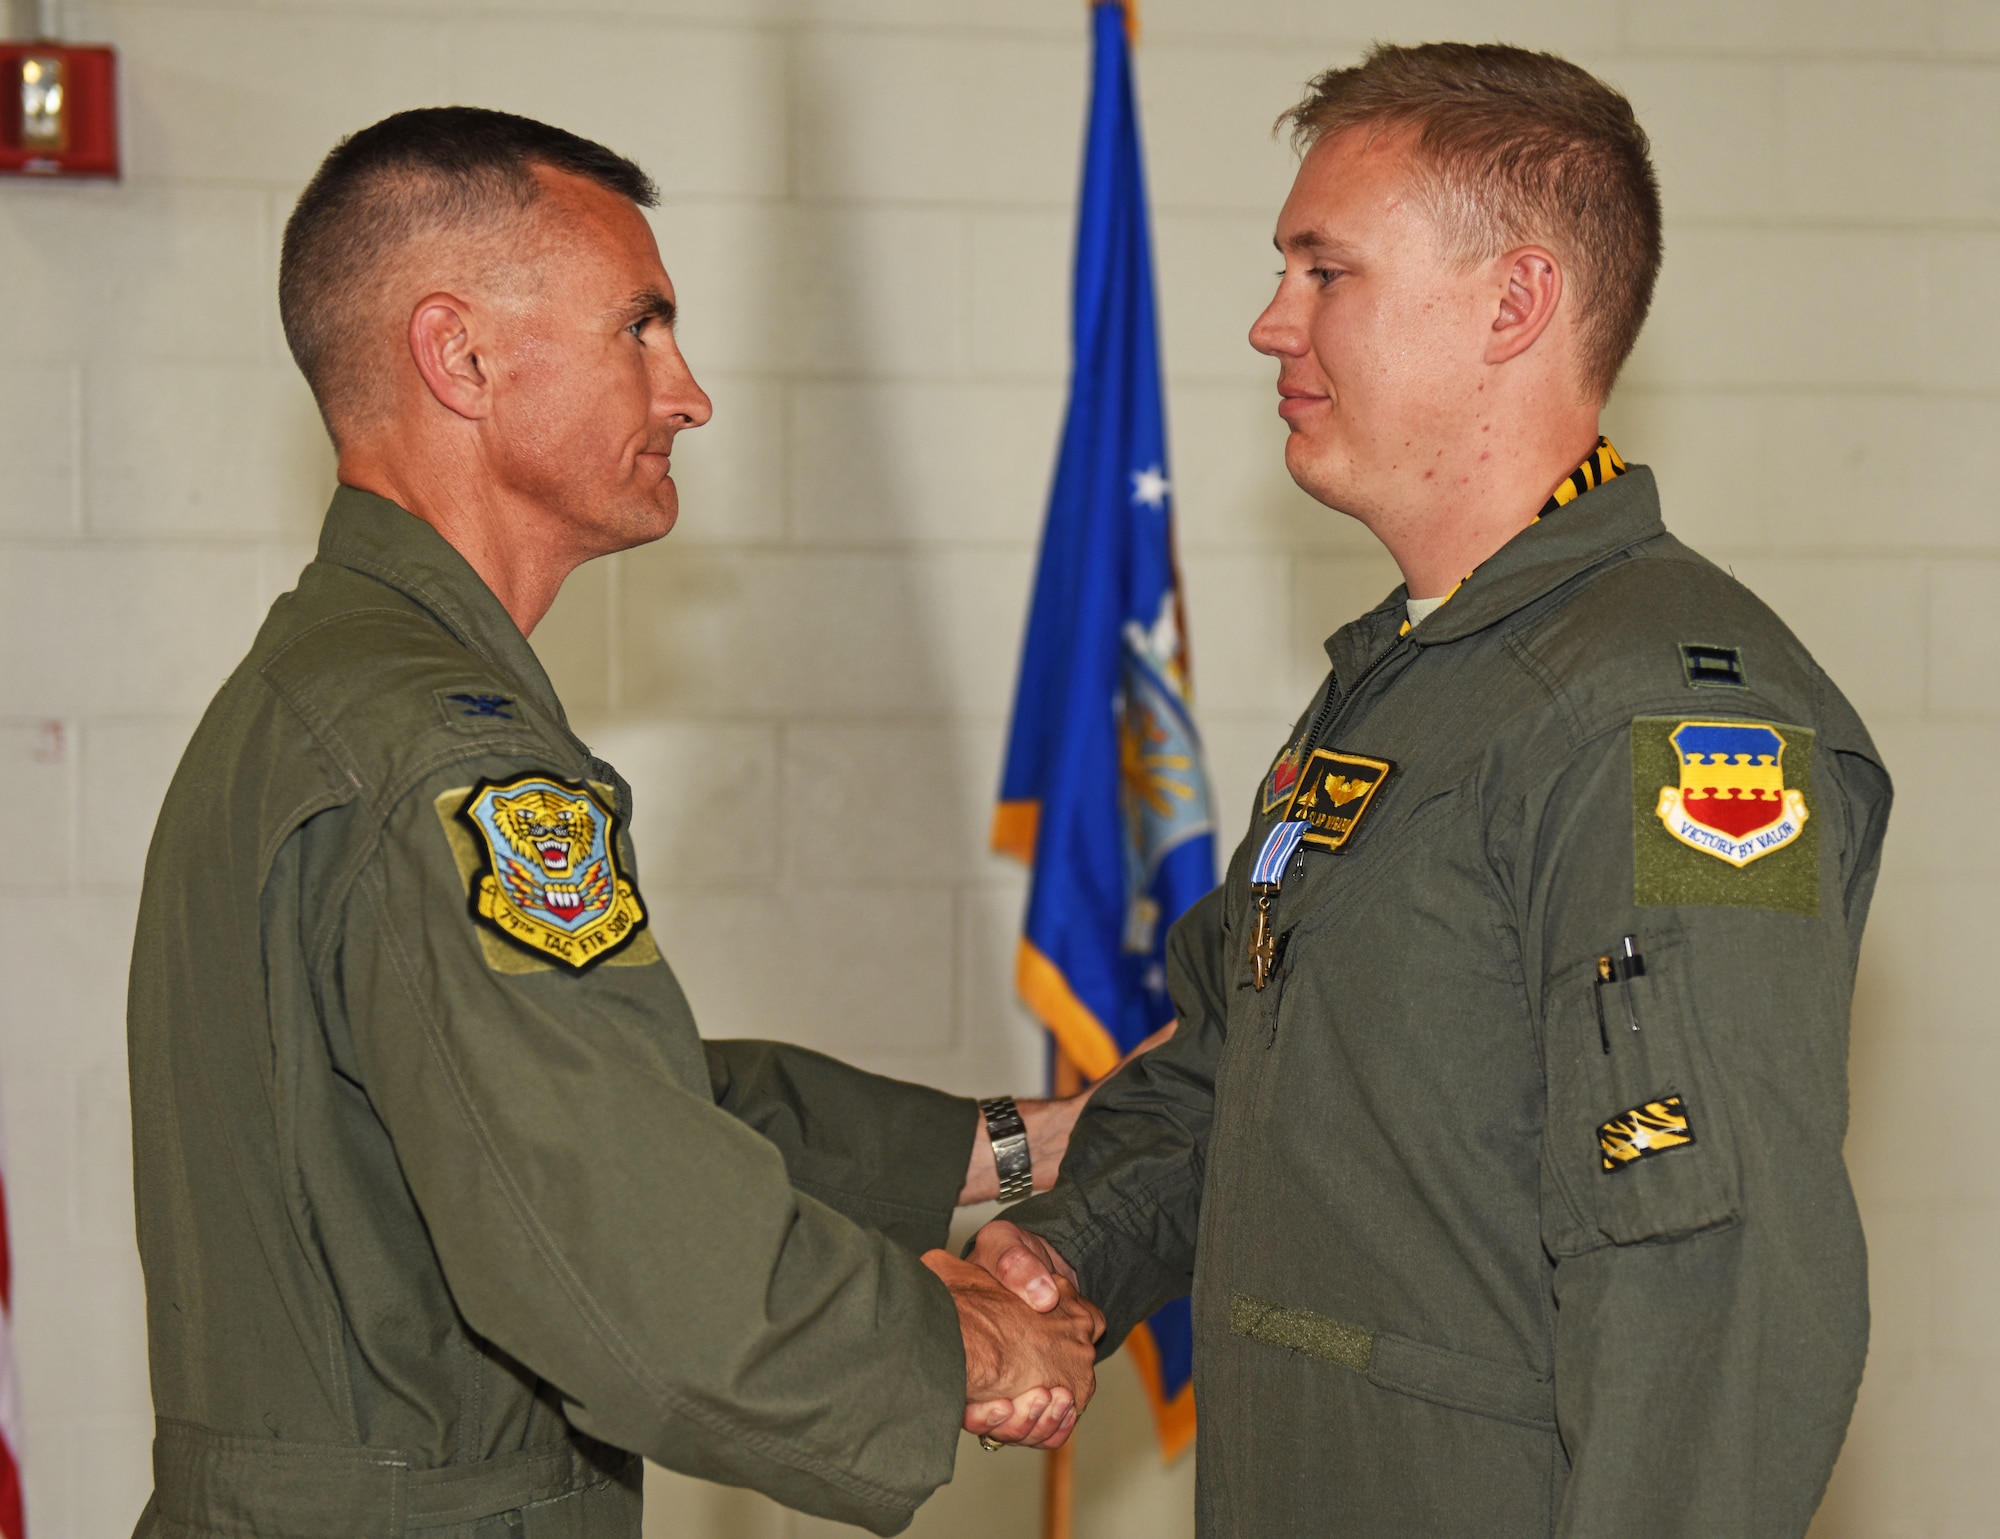 U.S. Air Force Col. Daniel Lasica, former 20th Fighter Wing commander, presents the Distinguished Flying Cross to Capt. John Nygard, 79th Fighter Squadron instructor pilot, at Shaw Air Force Base, S.C., June 7, 2018.